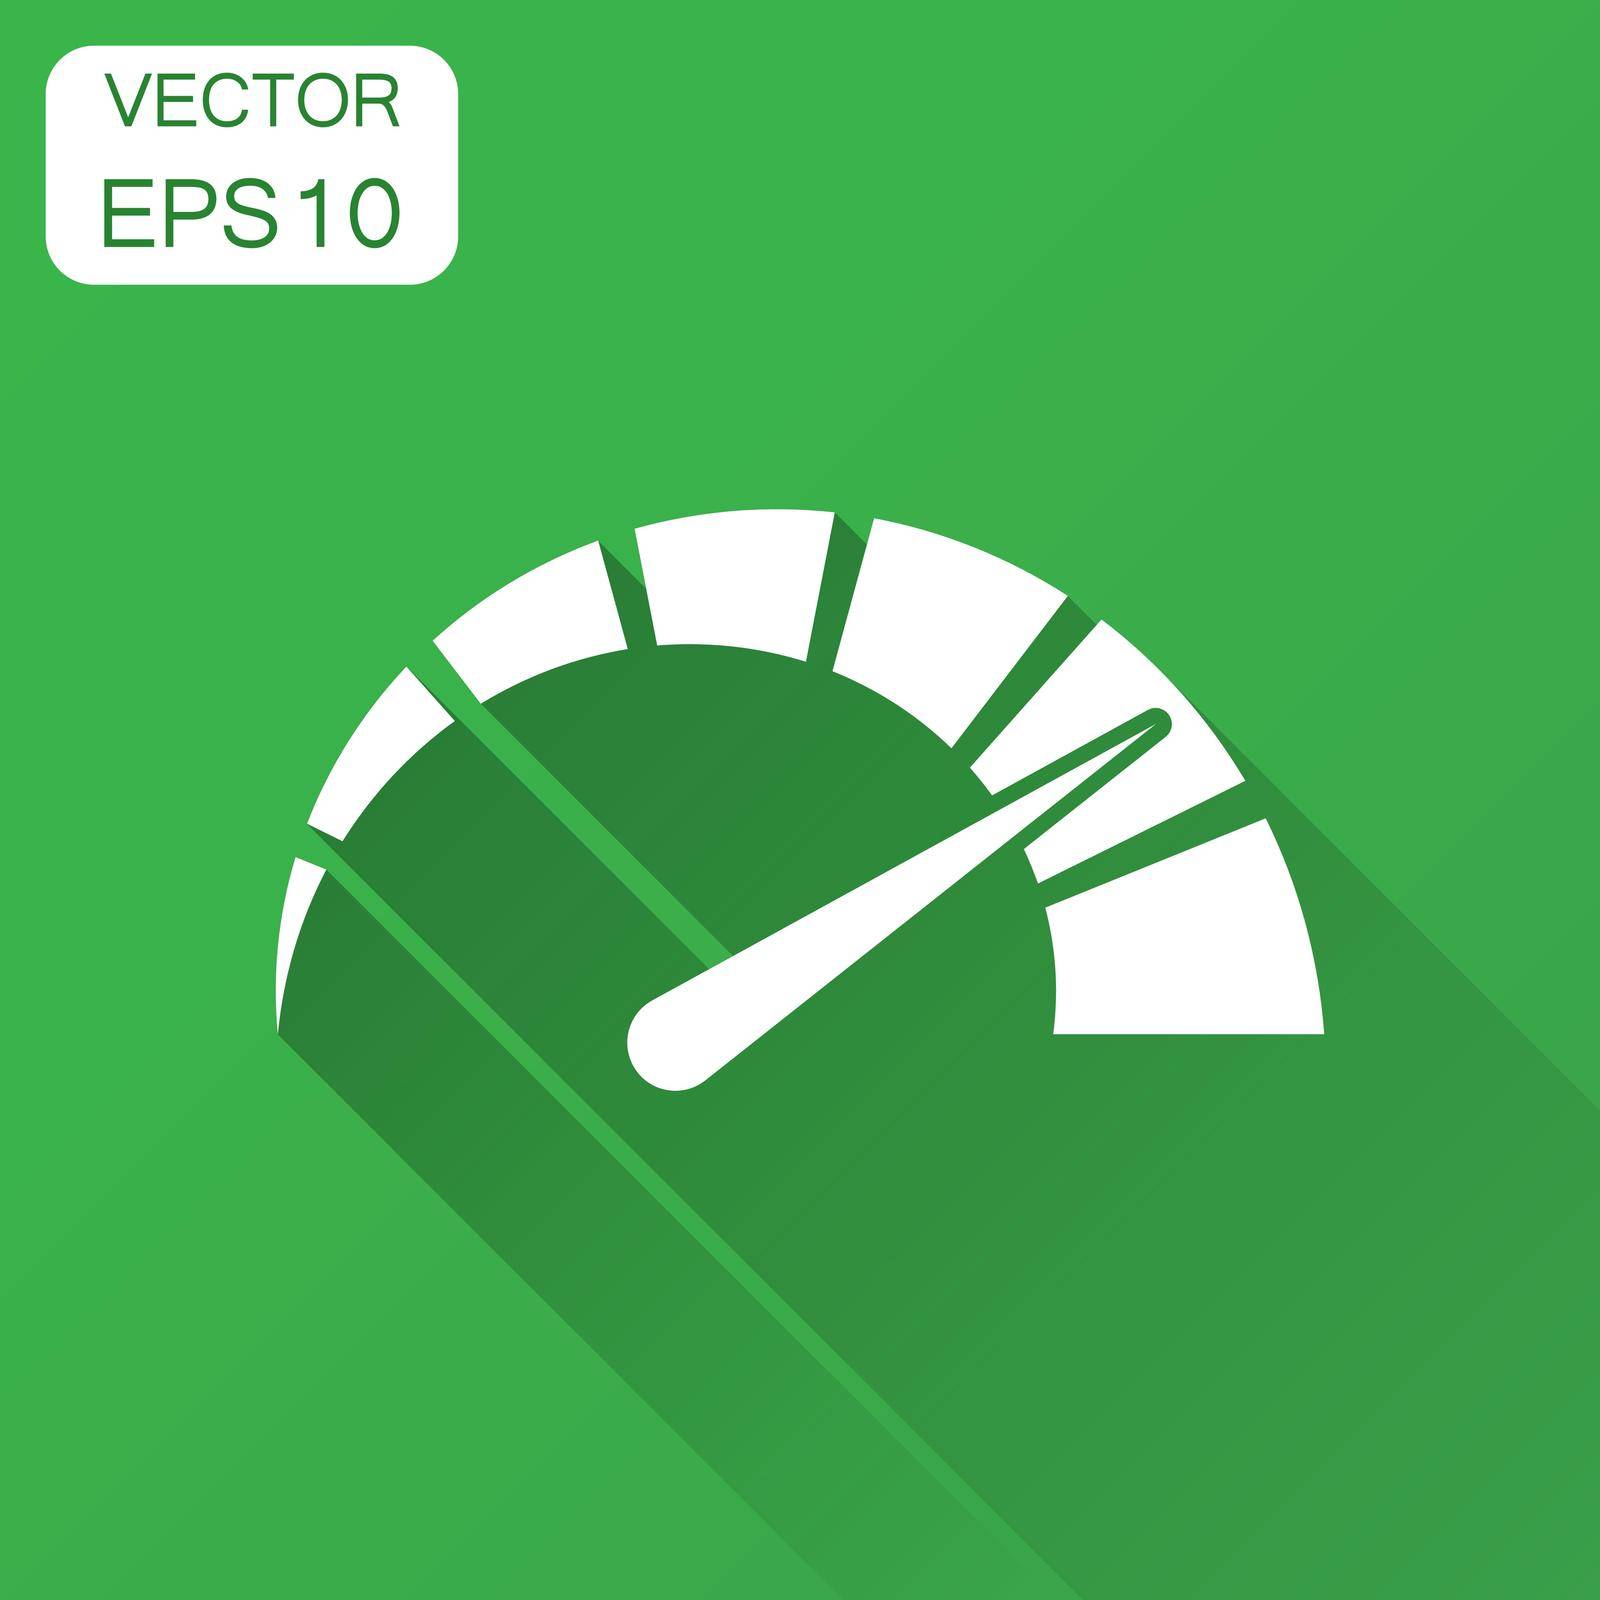 Meter dashboard icon in flat style. Credit score indicator level vector illustration with long shadow. Gauges with measure scale business concept.